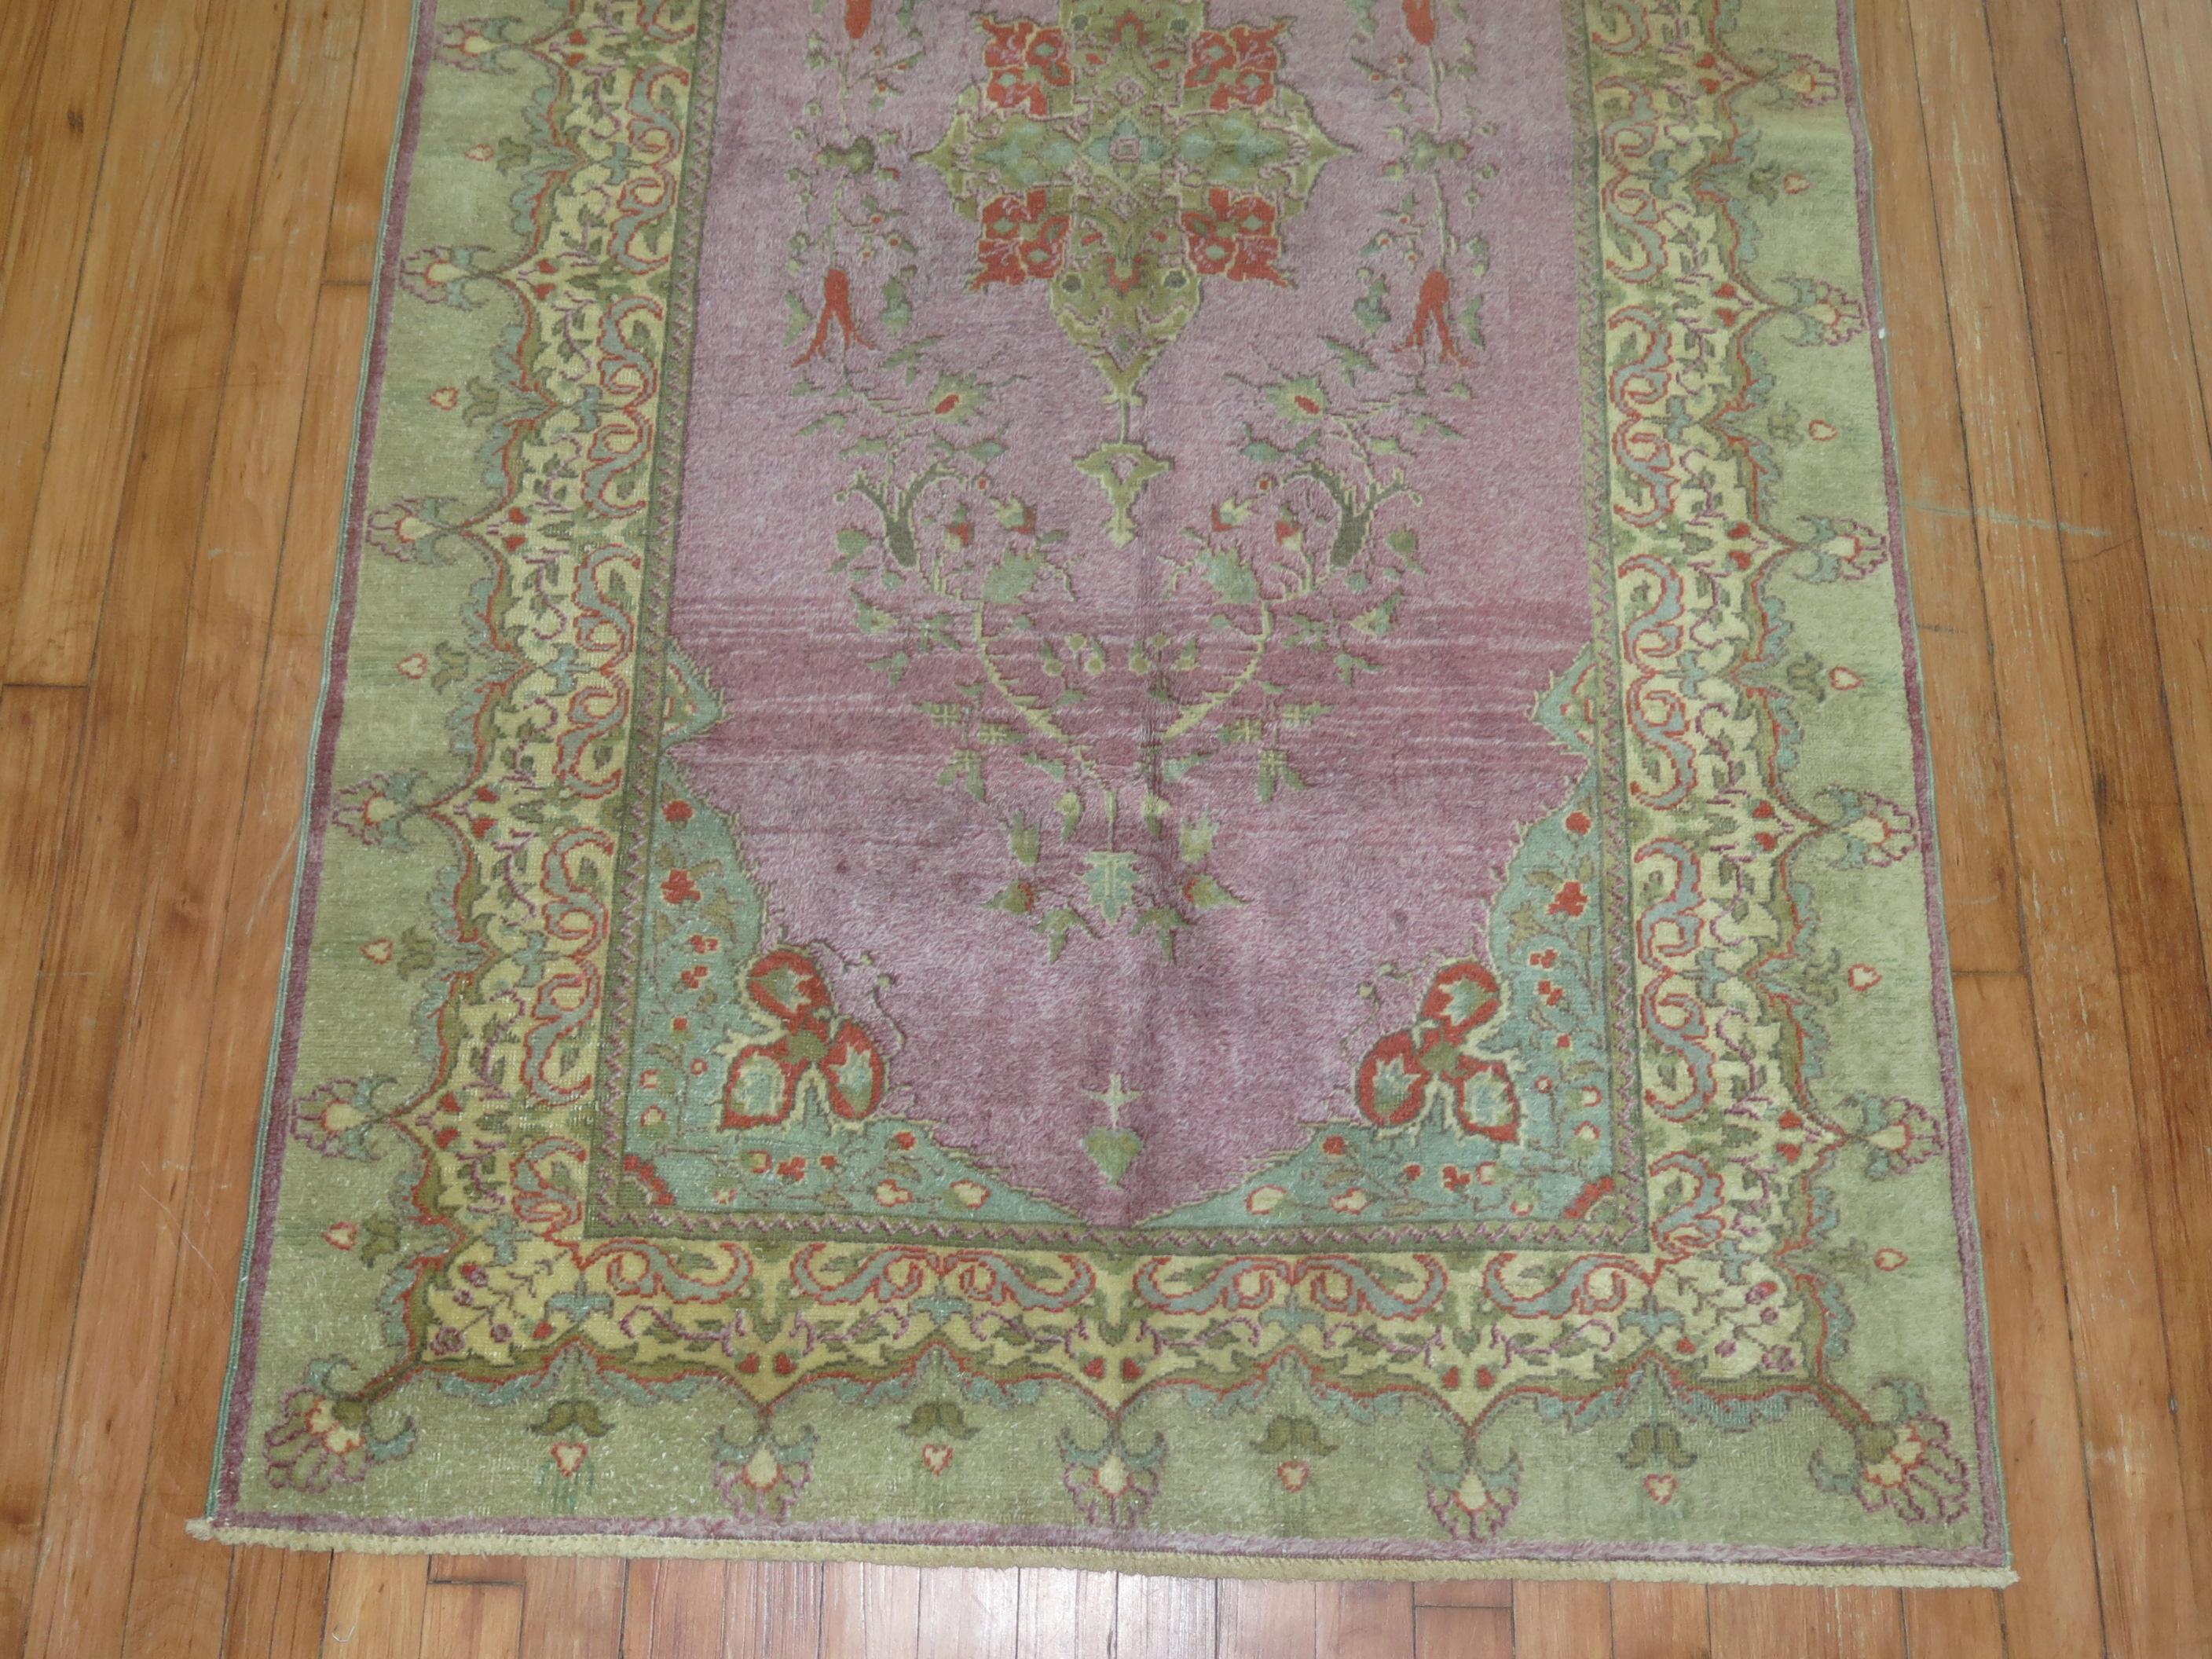 A one of a kind decorative Turkish rug with a formal feminine floral design in purple and light green.